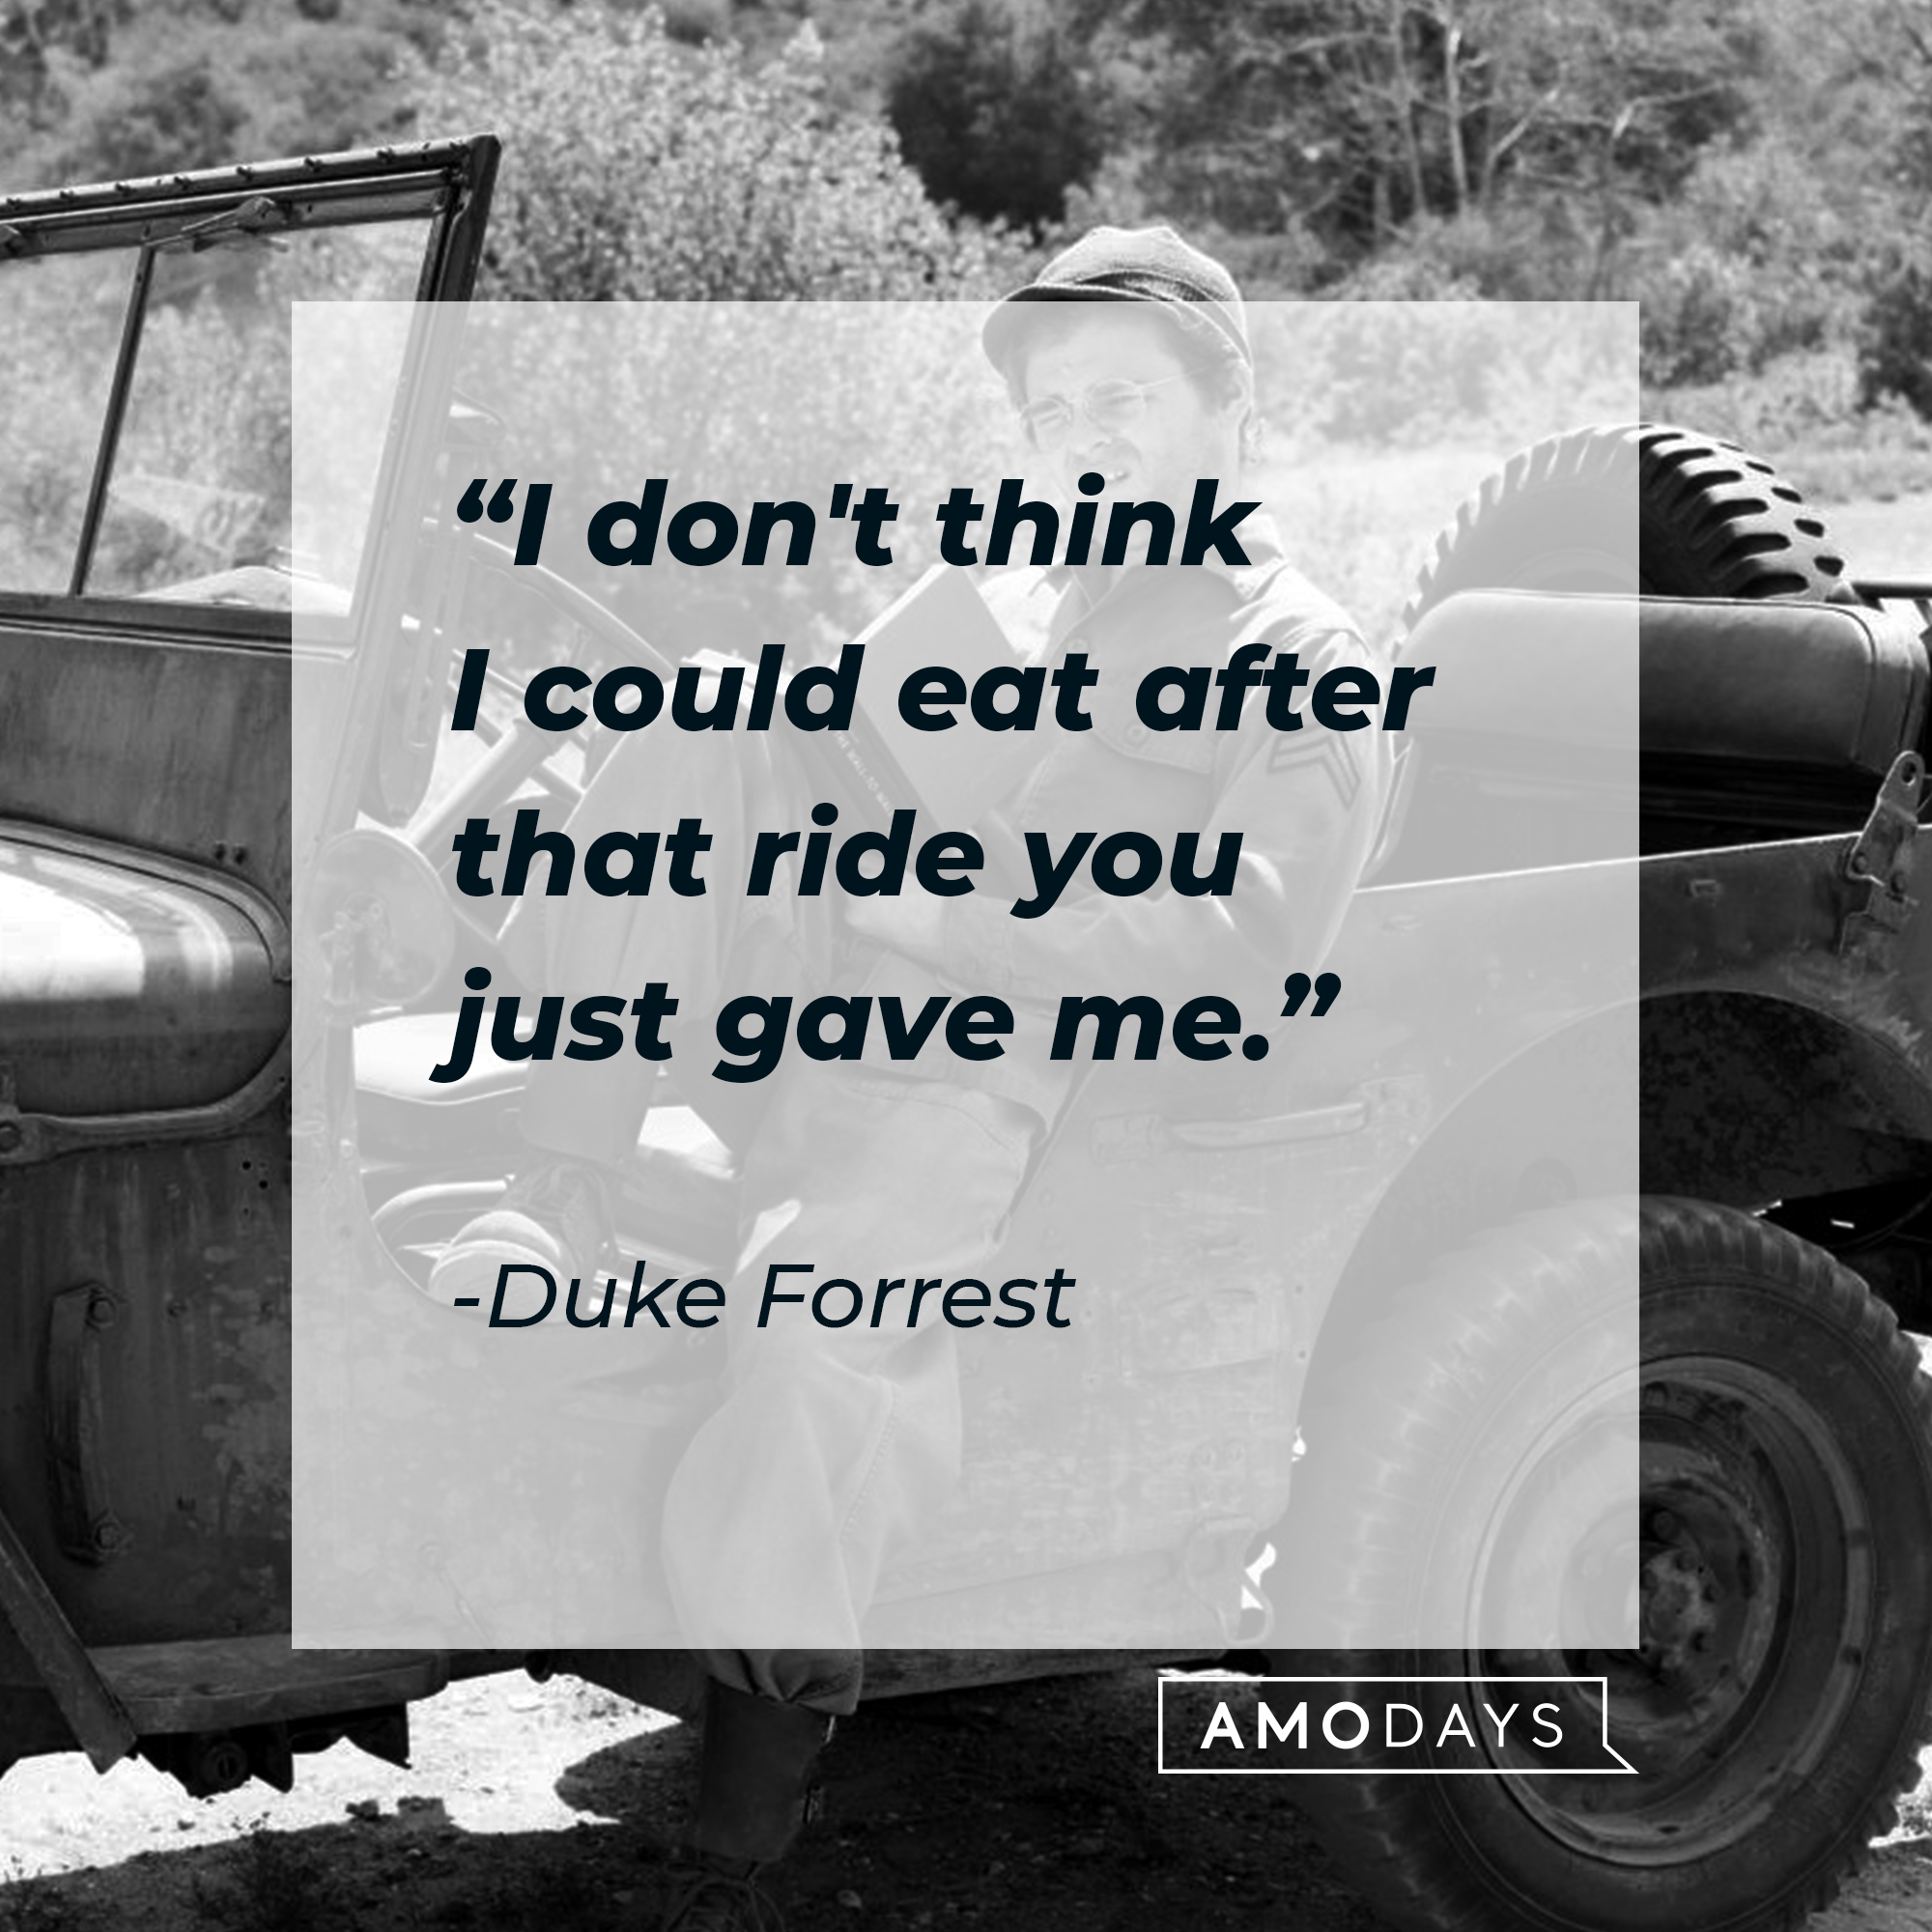 Duke Forrest's quote: "I don't think I could eat after that ride you just gave me." | Source: Getty Images